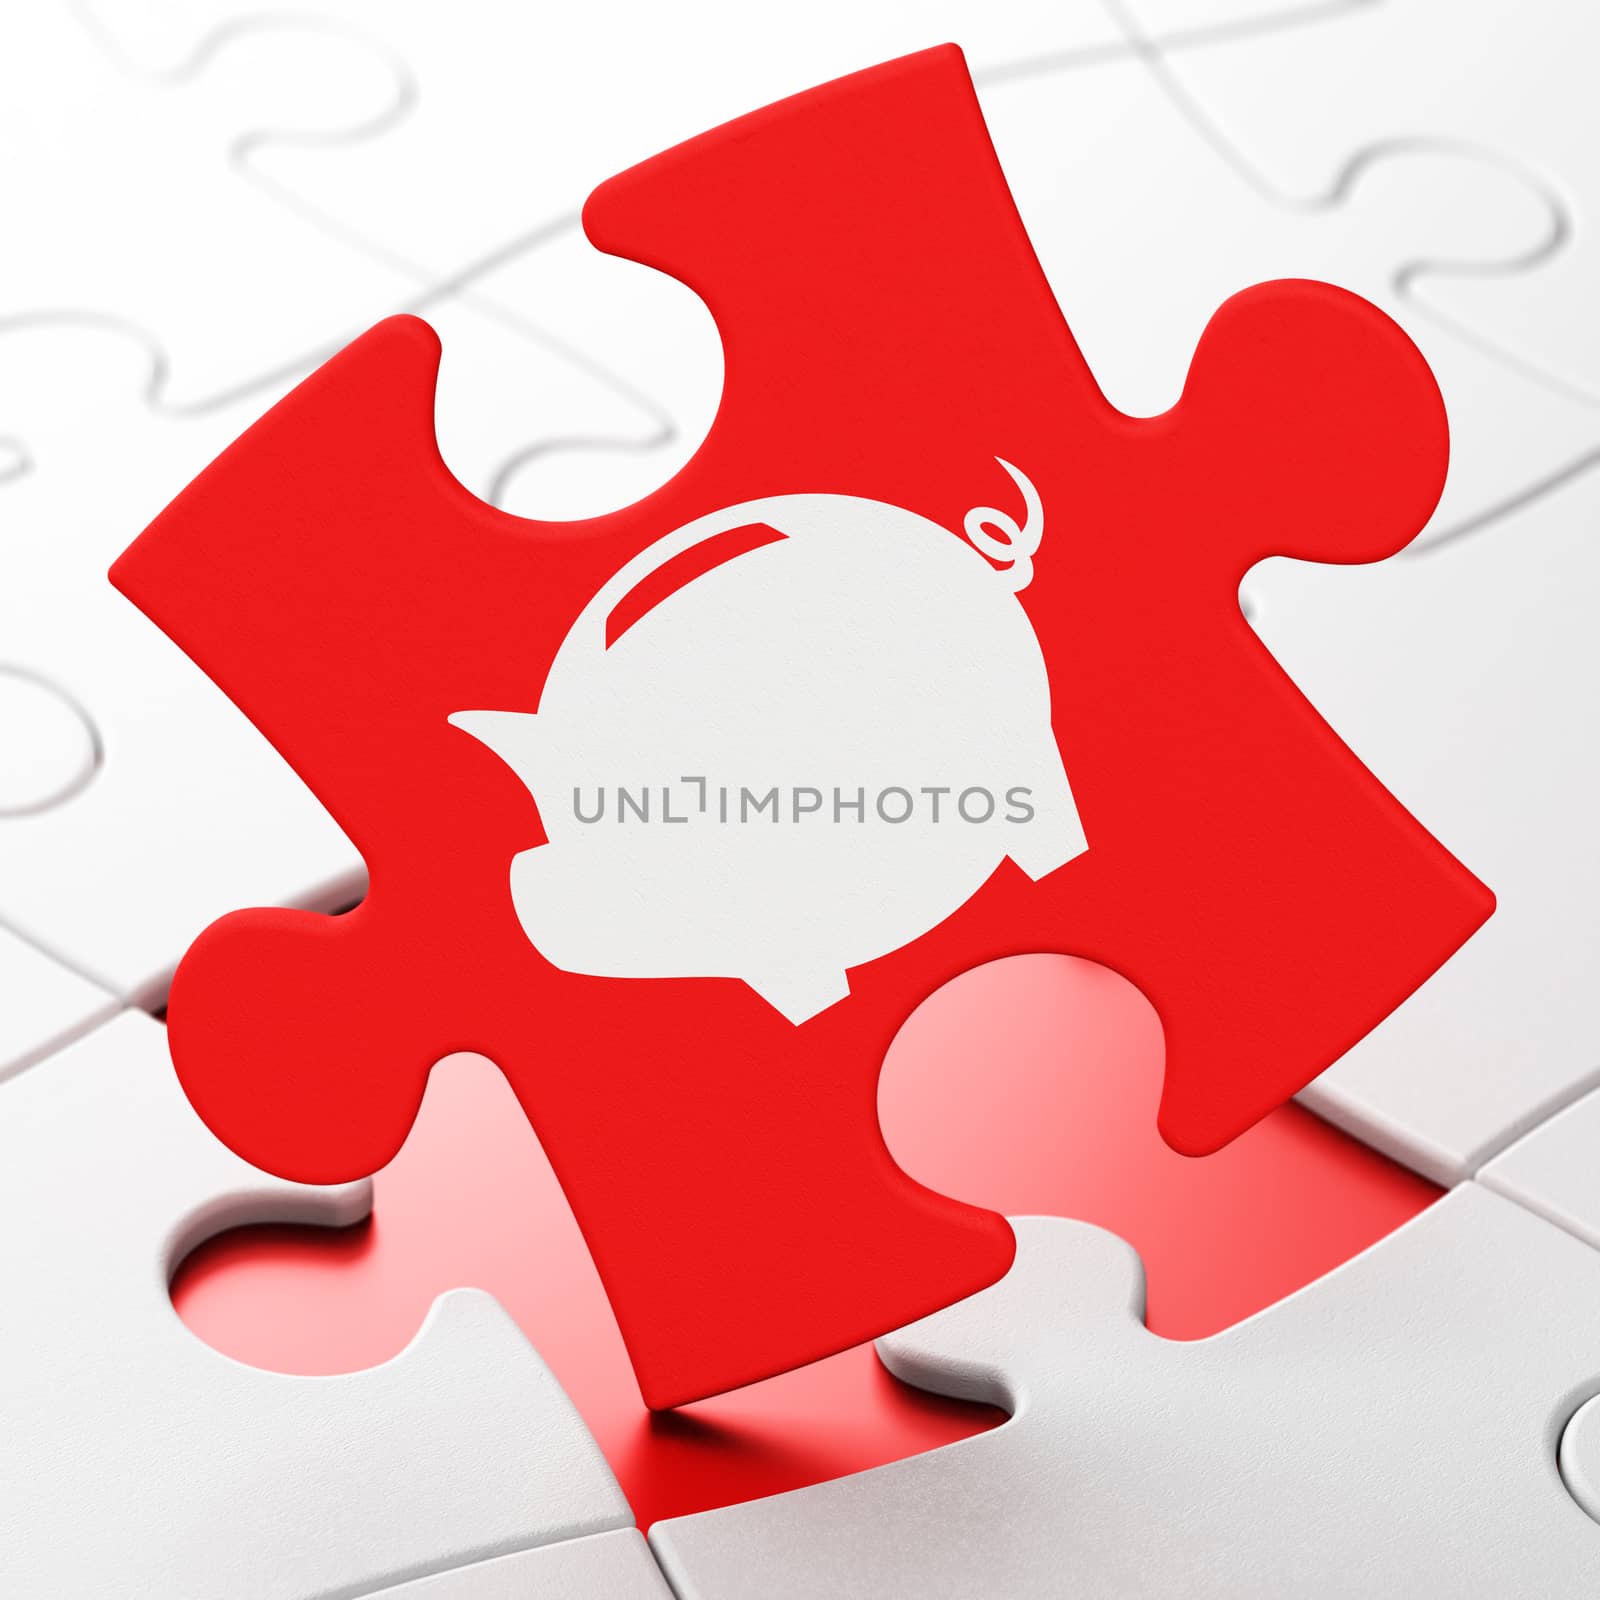 Currency concept: Money Box on Red puzzle pieces background, 3D rendering